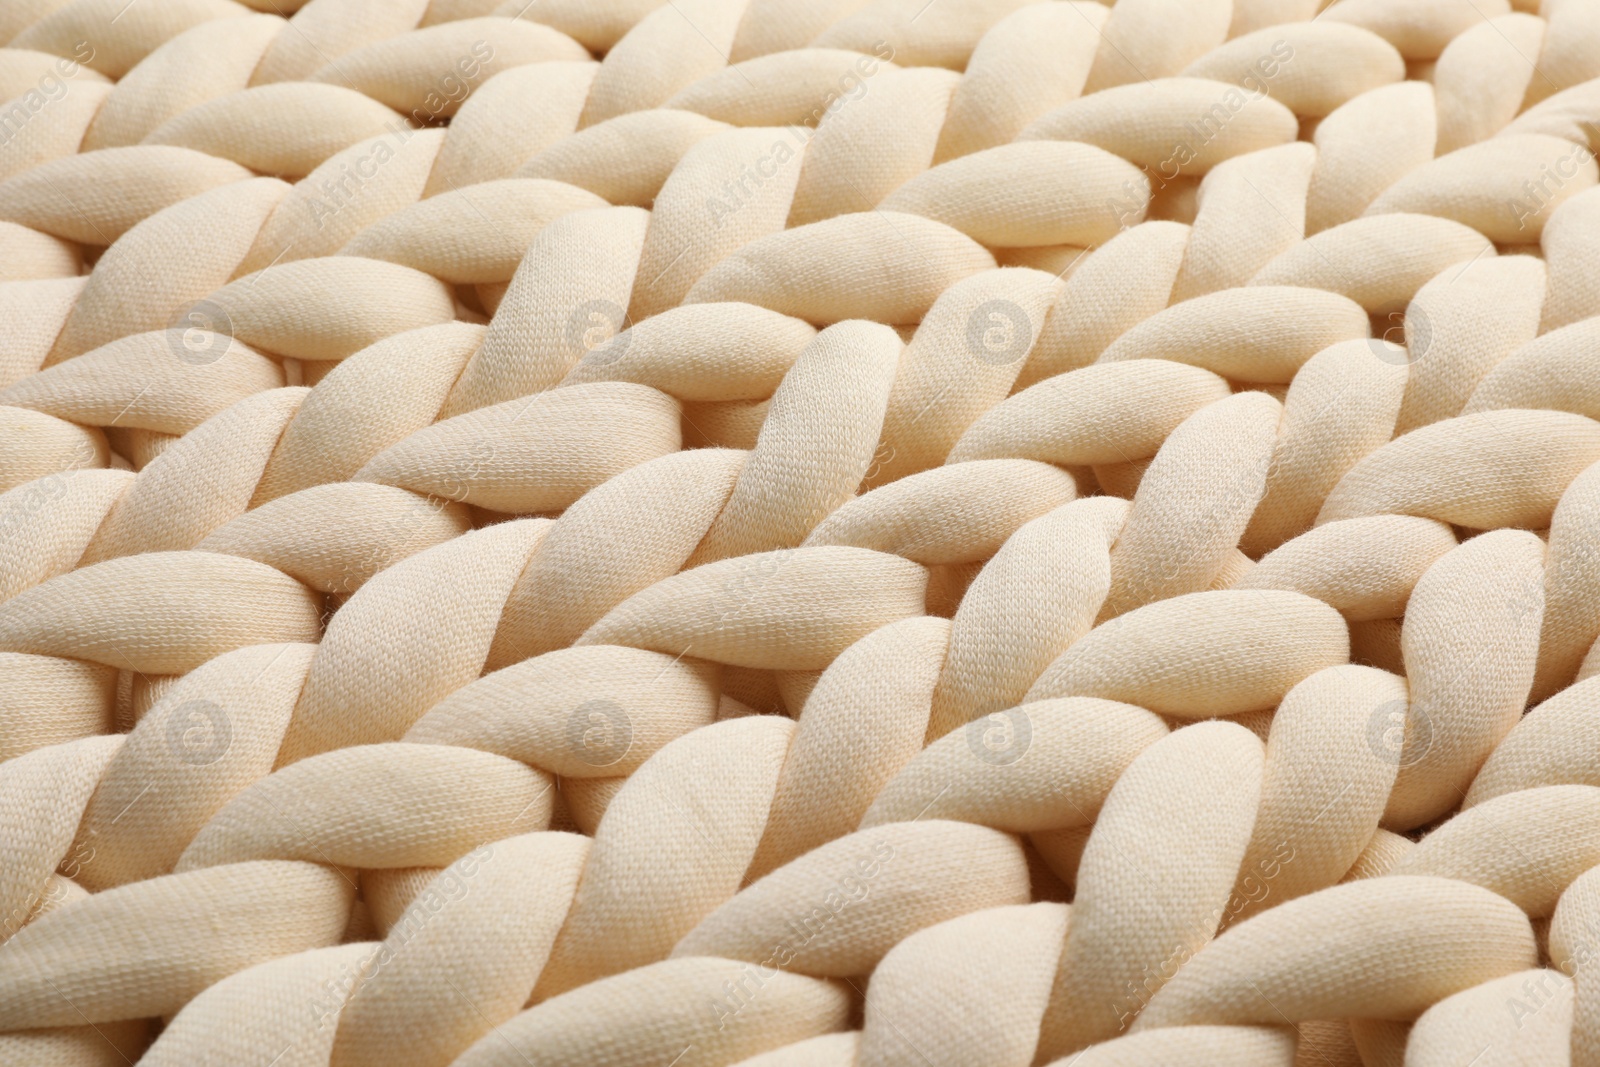 Photo of Chunky knit blankets as background, closeup view